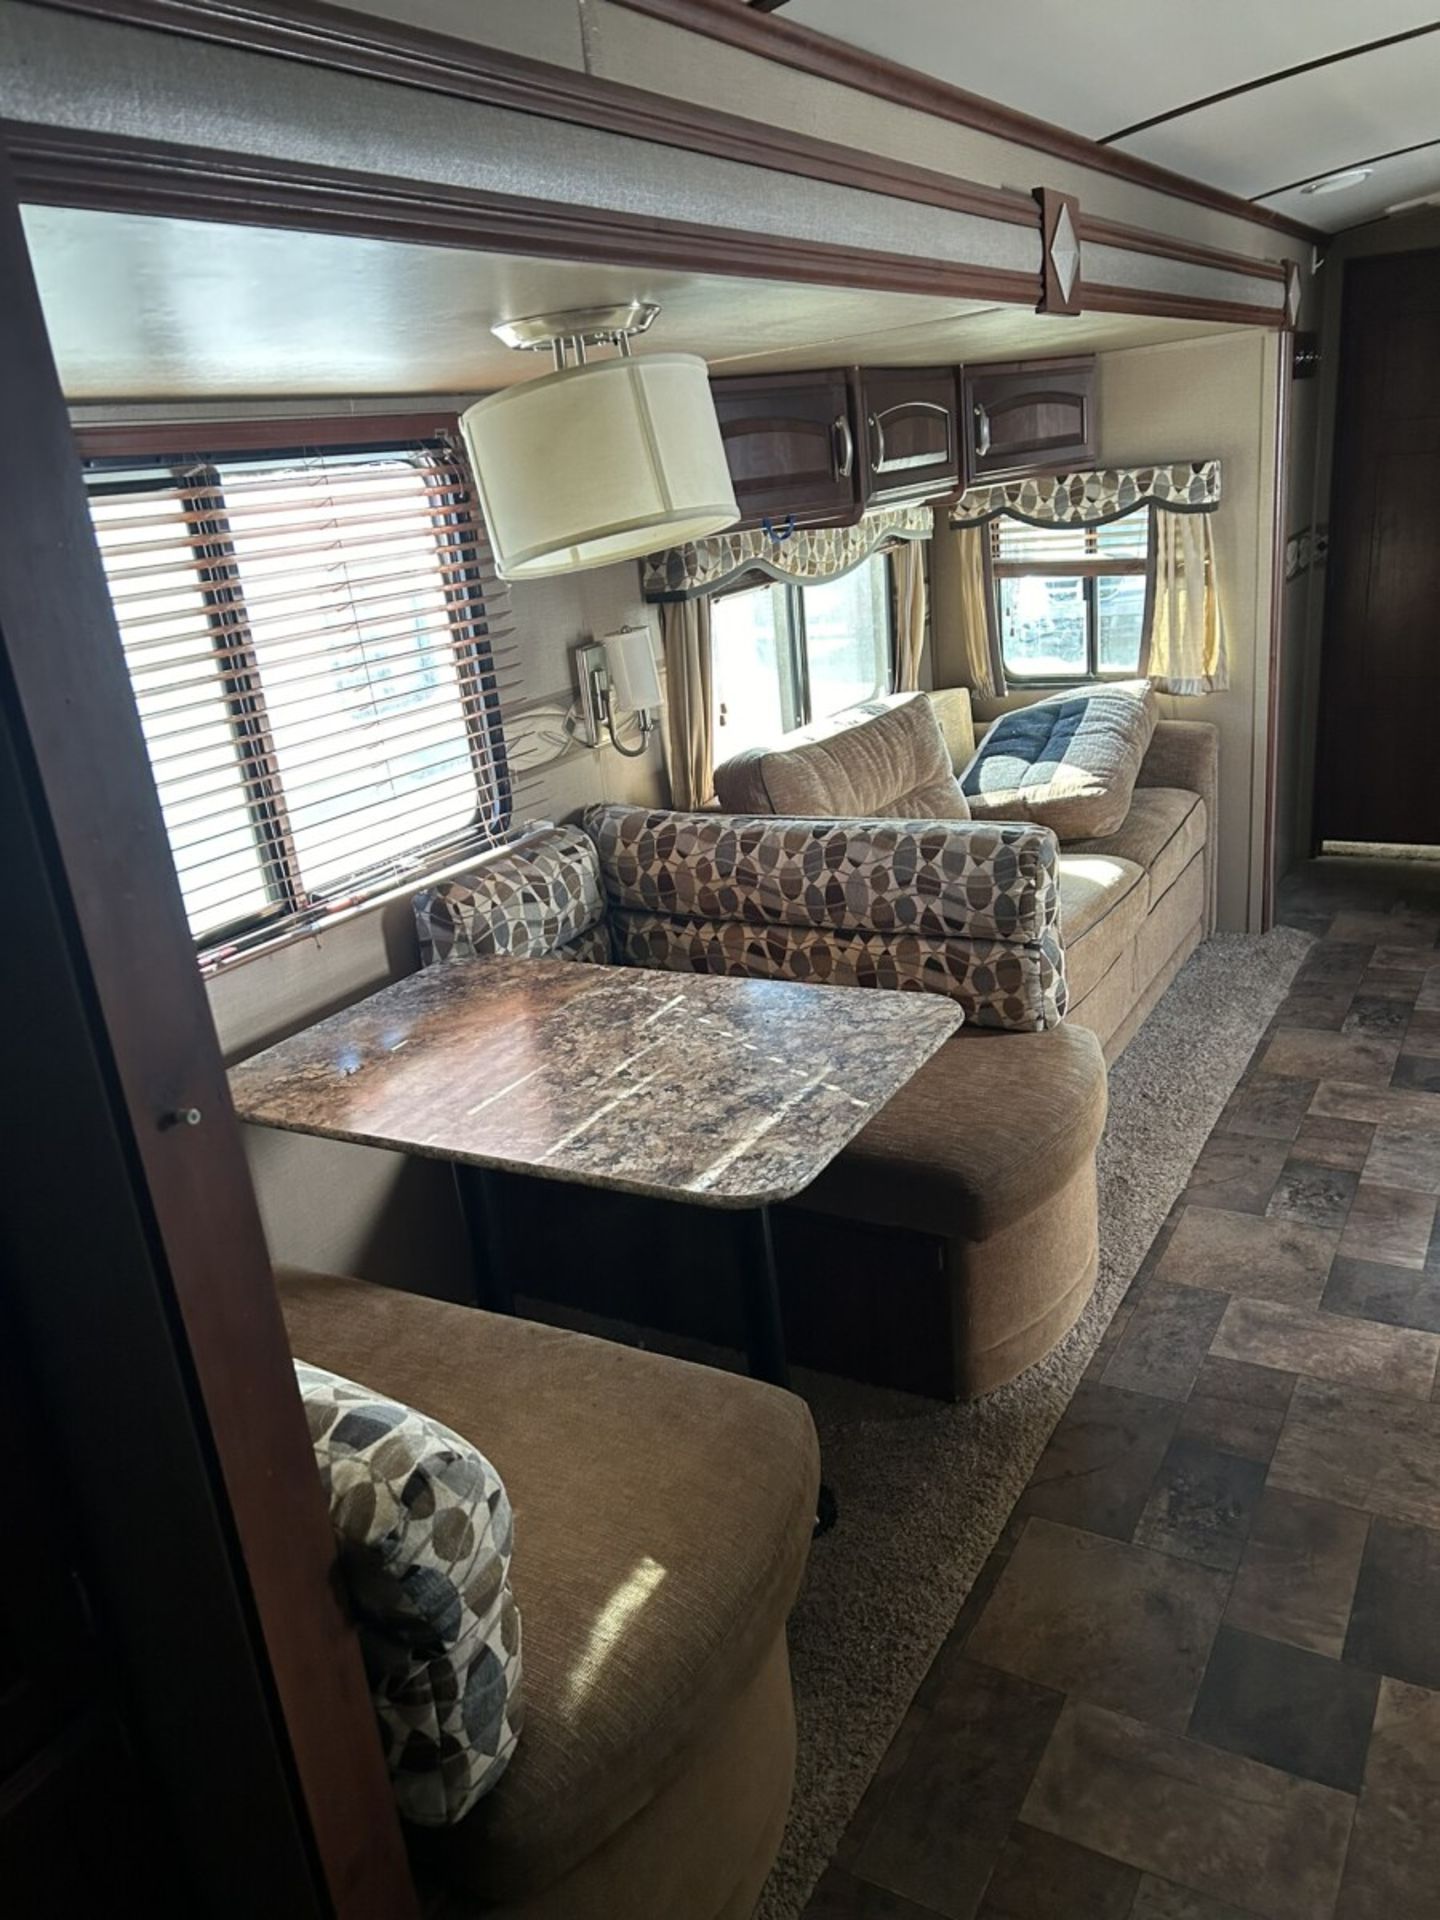 2014 OUTBACK KEYSTONE SUPER-LITE 33 FT HOLIDAY TRAILER, DOUBLE SLIDE, POWER AWNING, OUTDOOR KITCHEN, - Image 7 of 15